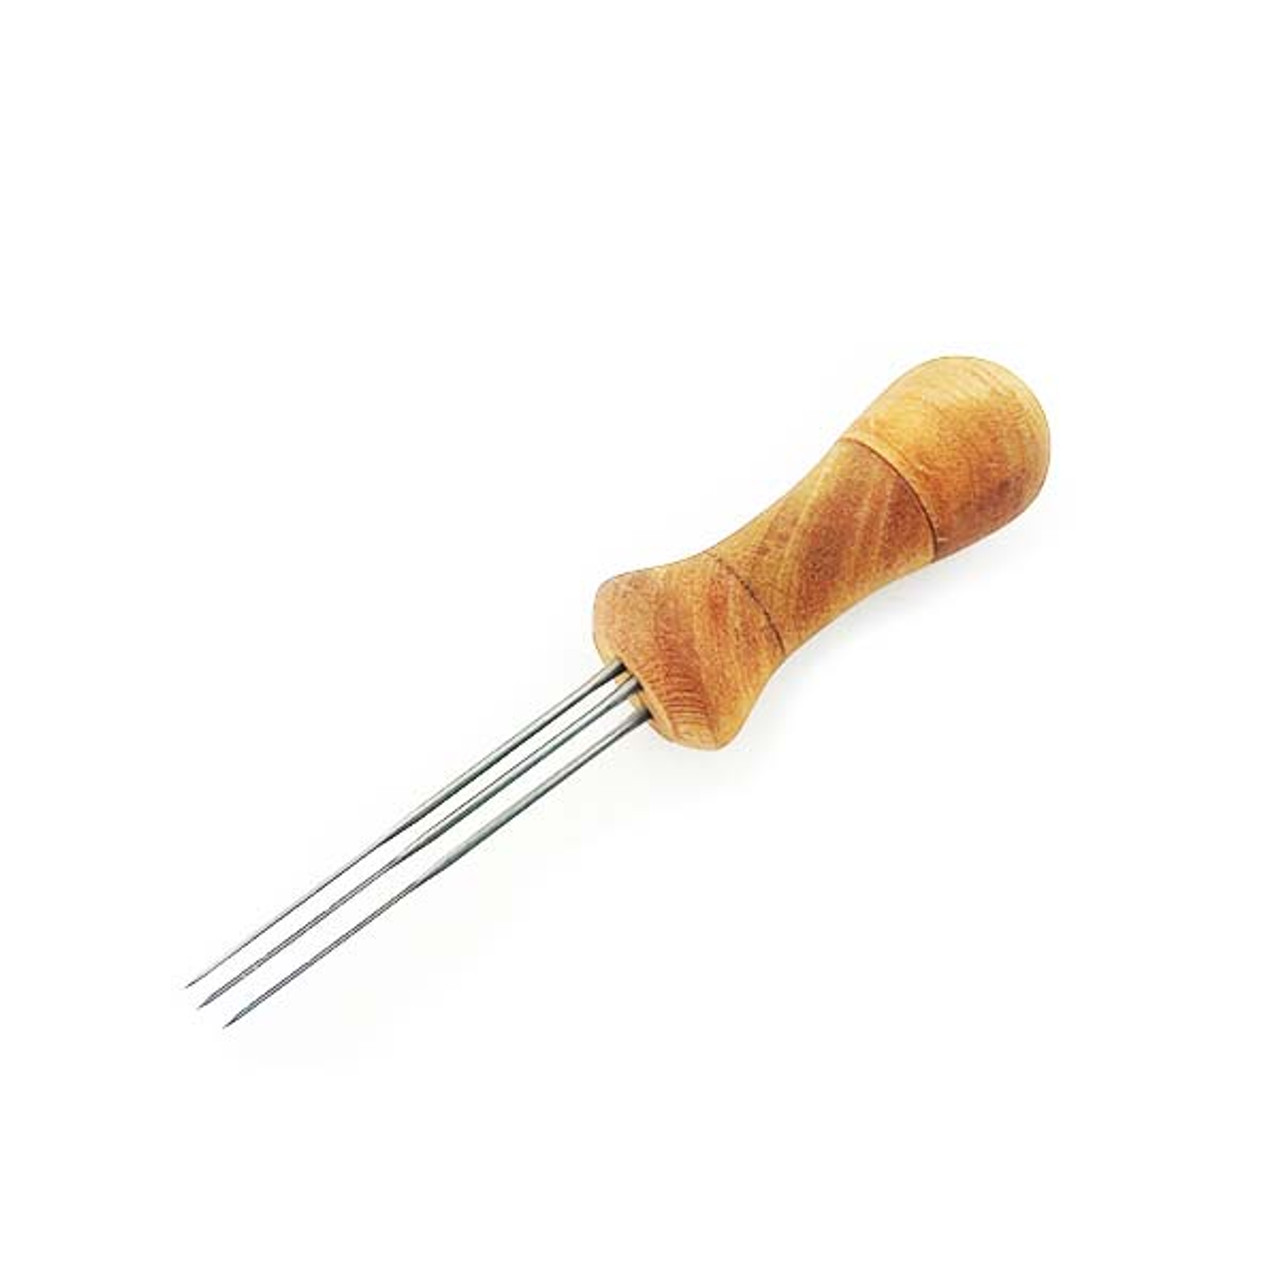 Wood Felting Needle Tool by Colonial – Rose Mille